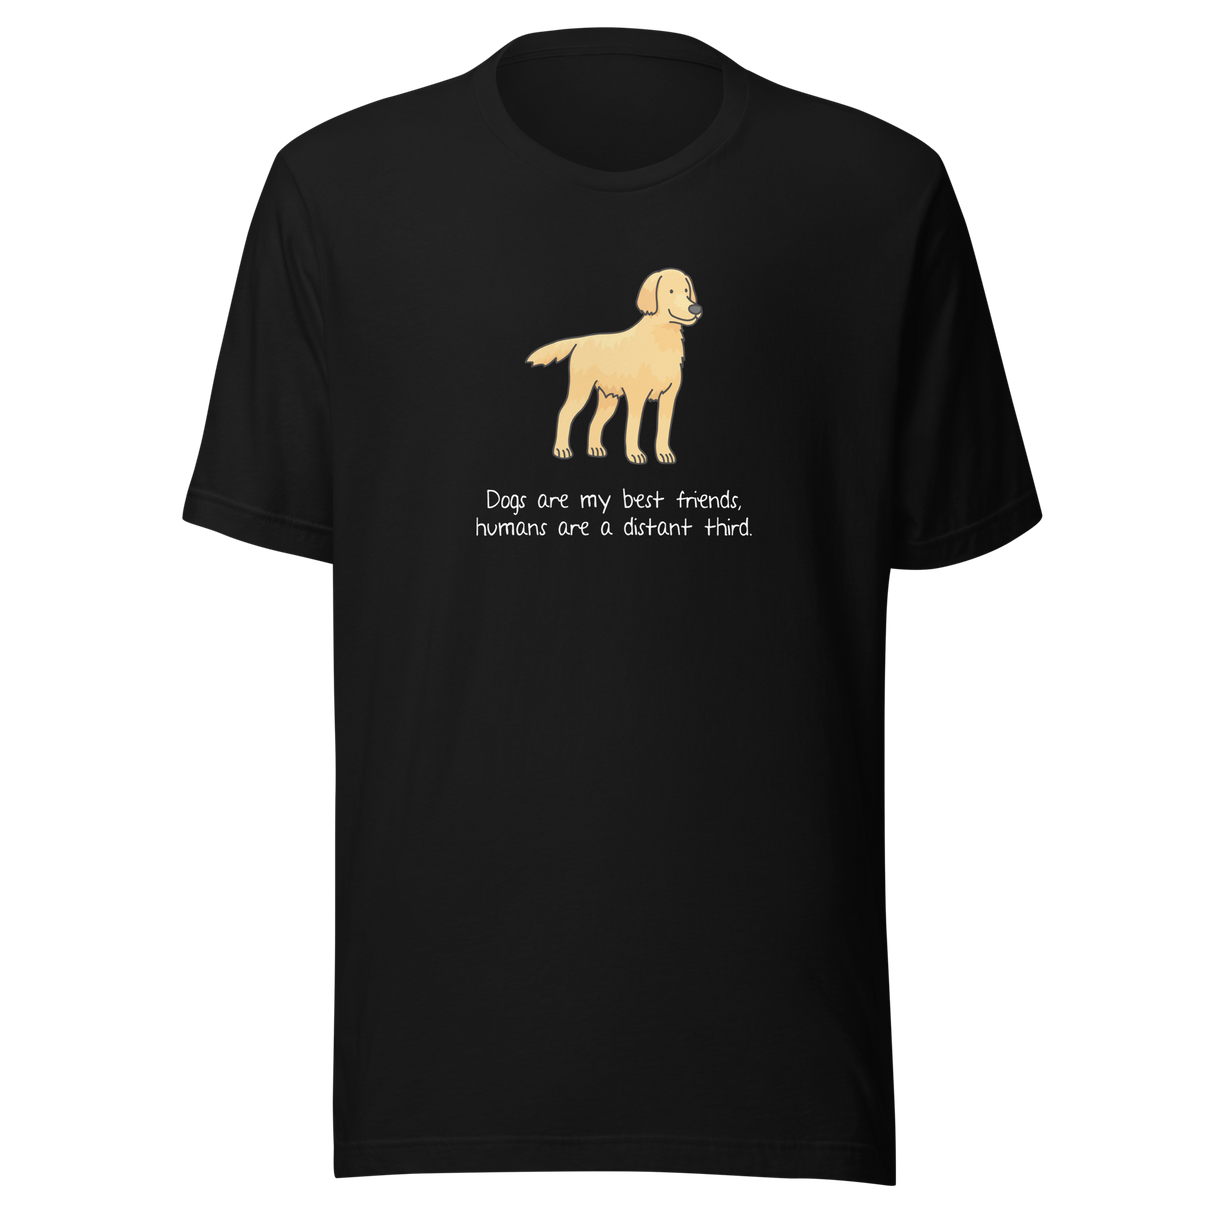 dogs-are-my-best-friends-humans-are-a-distant-third-dog-tee-mans-best-friend-t-shirt-puppy-tee-dog-lover-t-shirt-dog-mom-tee#color_black